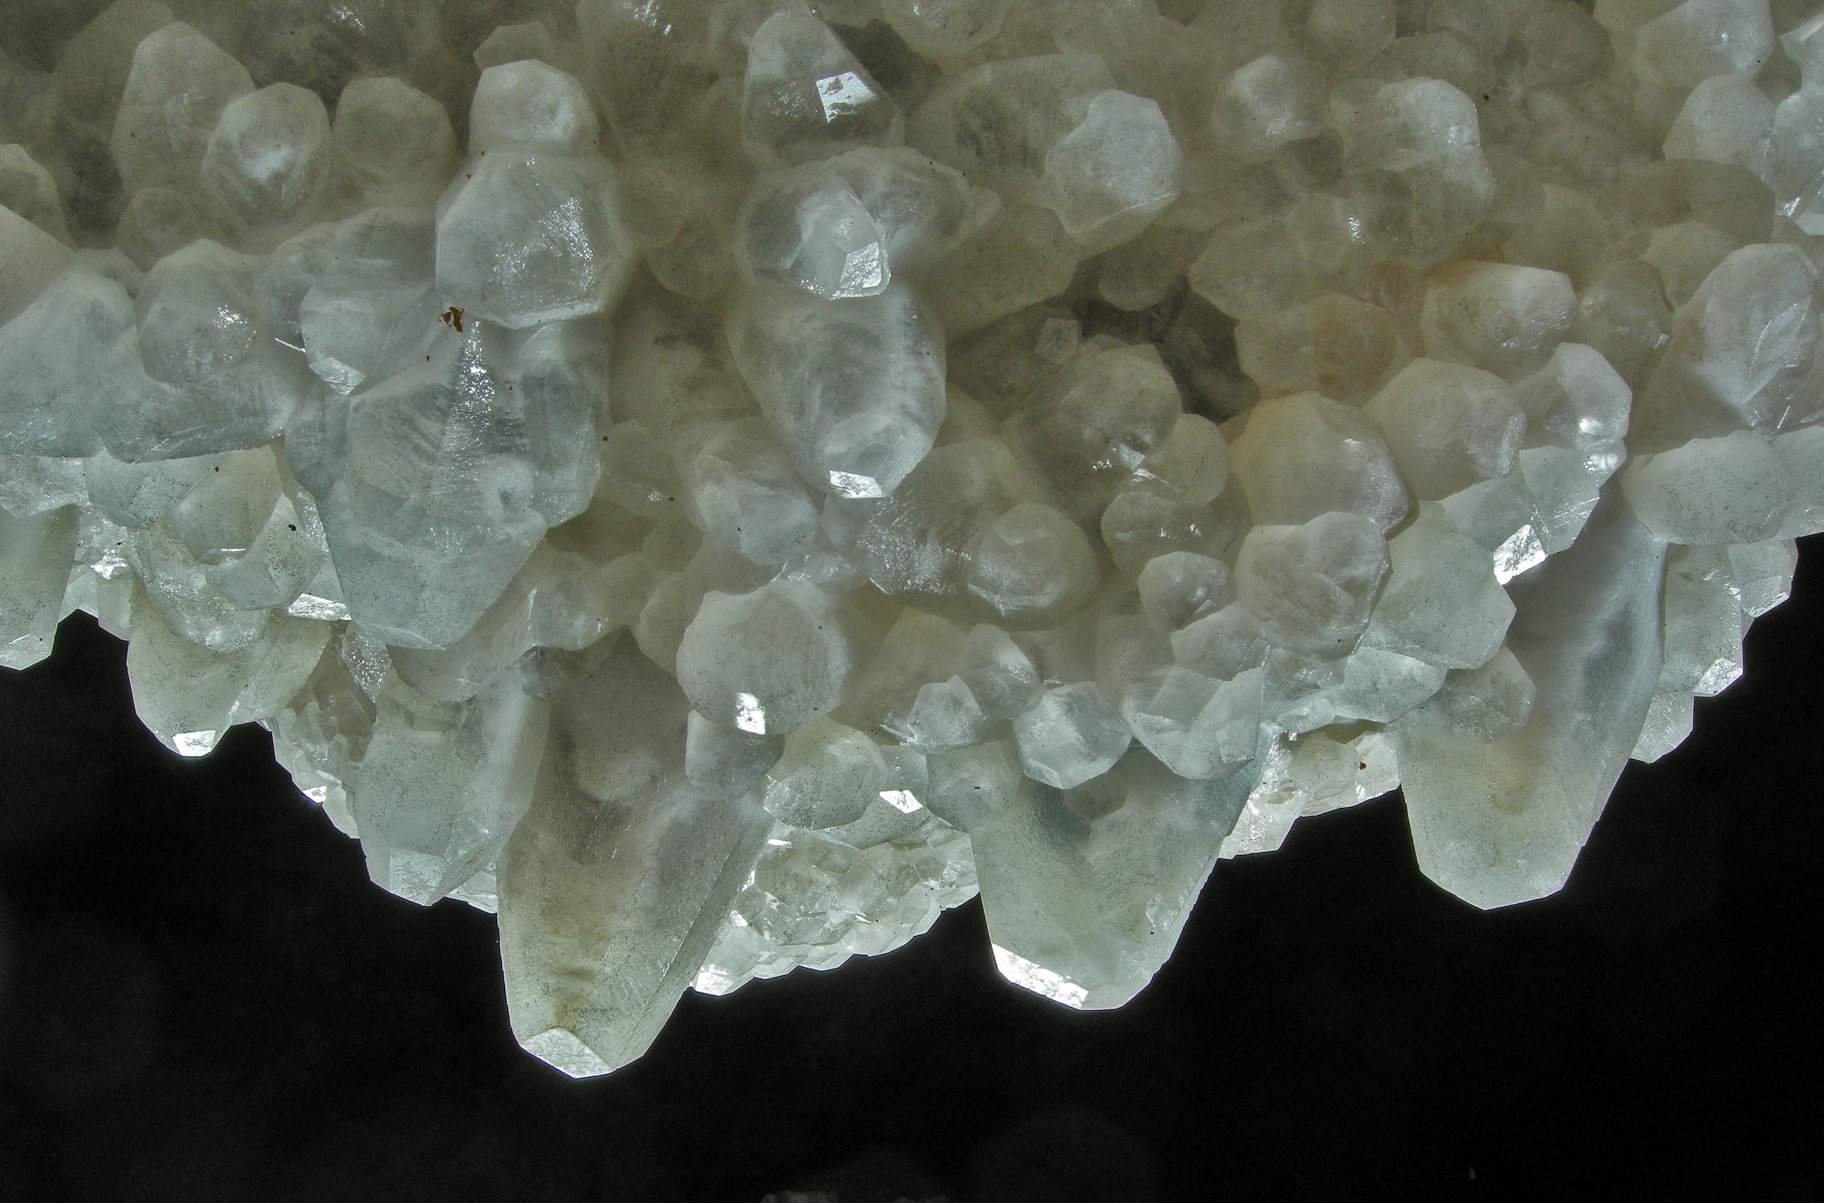 White-colored crystals with blunt tips sparkle against a black background.